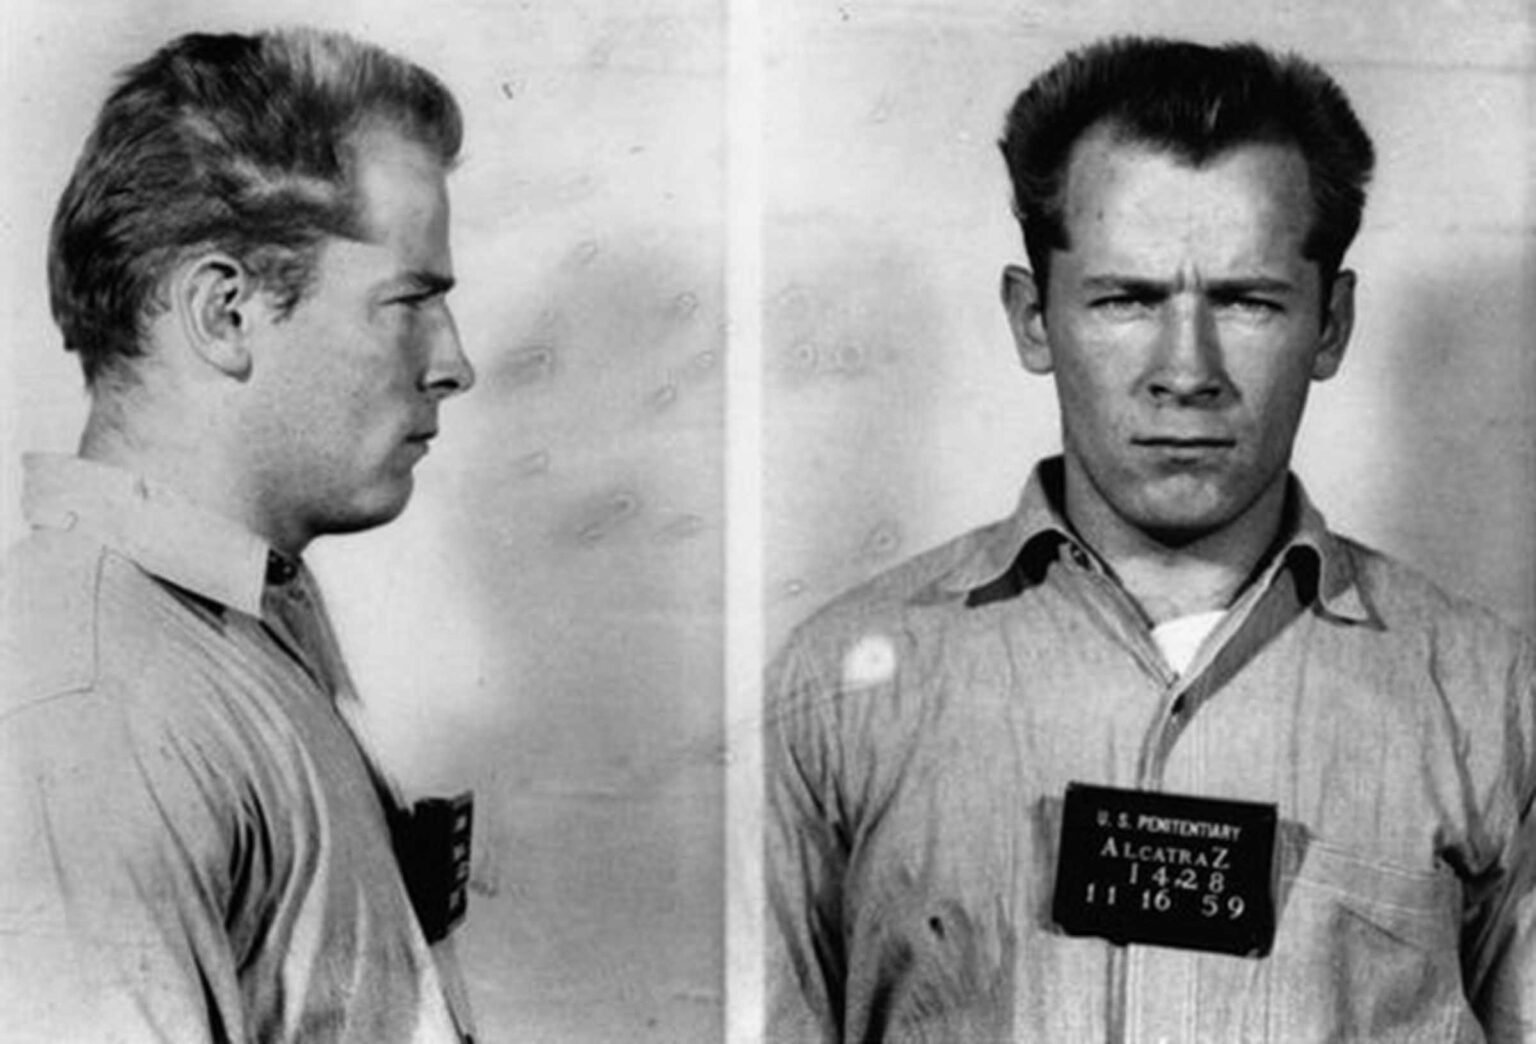 James "Whitey" Bulger is up there with Al Capone, Machine Gun Kelly, and John Dillinger, yet no one mentions him. Learn more about the Boston mobster.